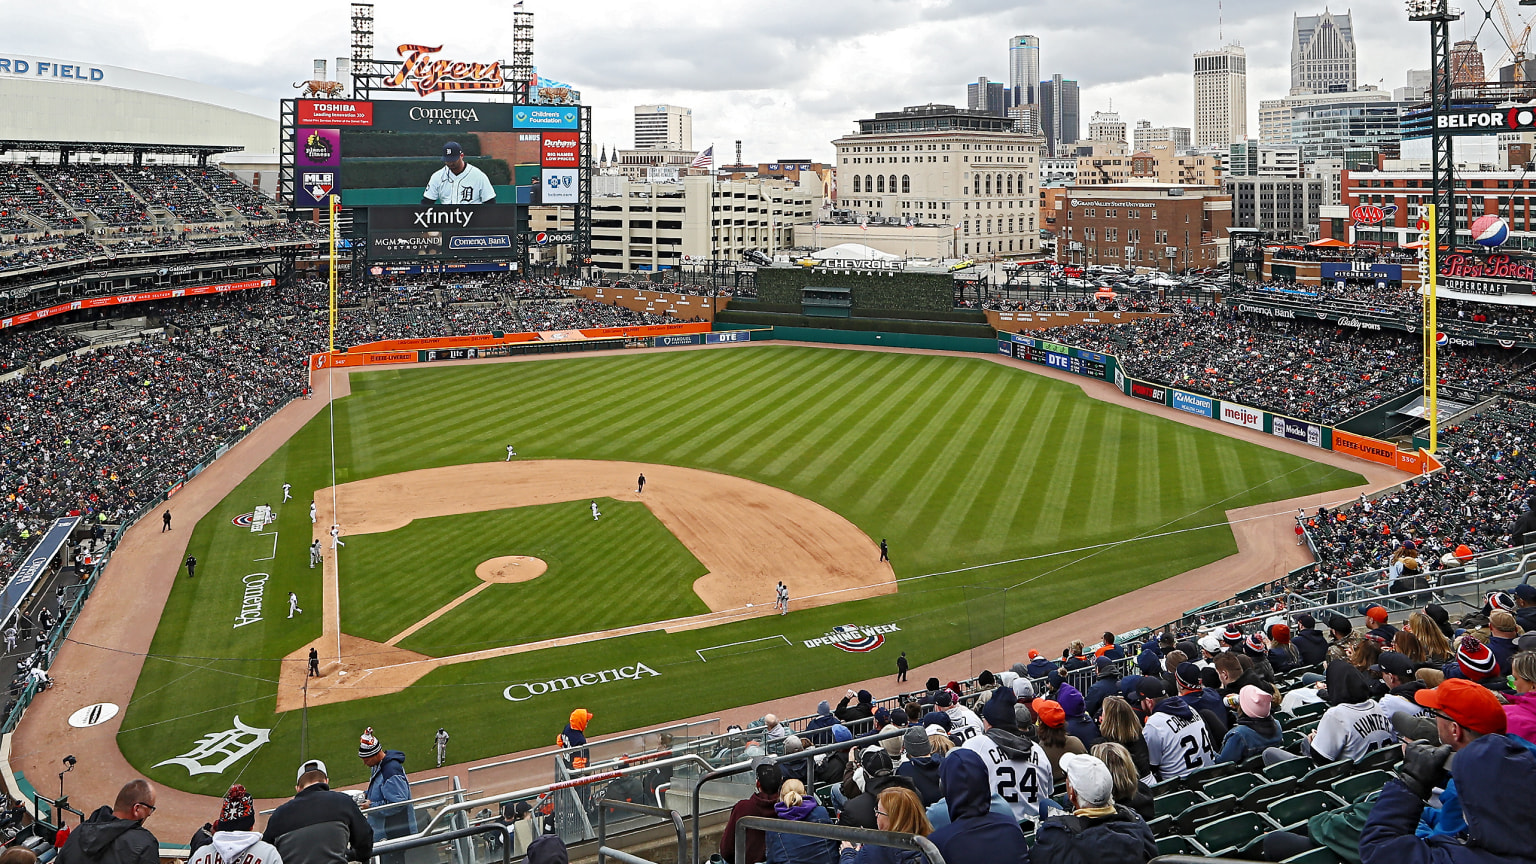 A view of Comerica Park from behind home plate